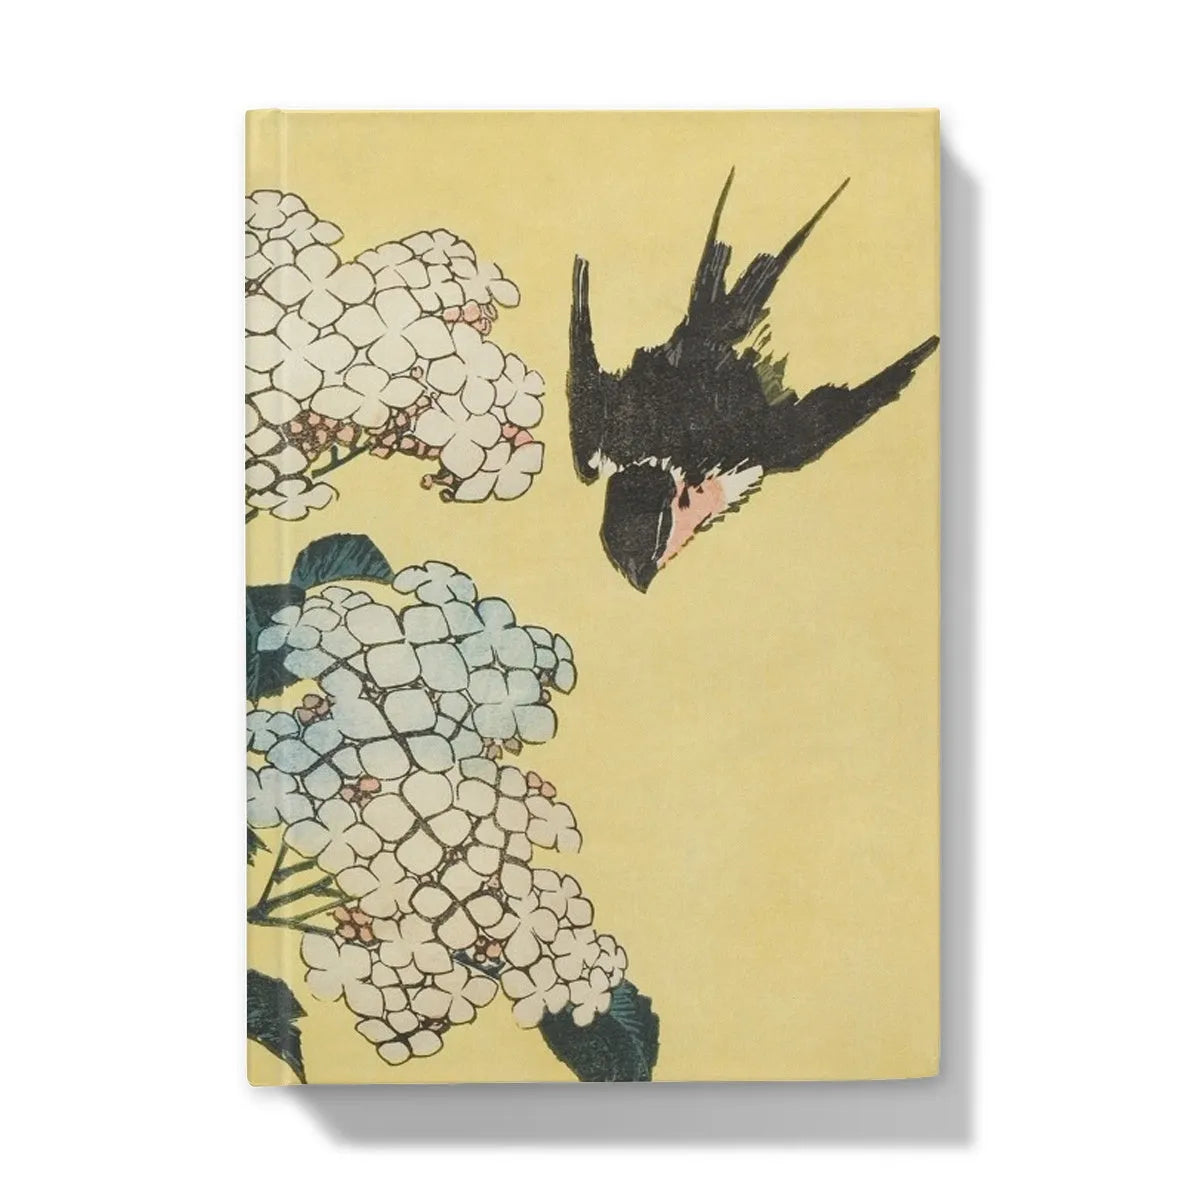 Hydrangea And Swallow By Hokusai Hardback Journal - 5’x7’ / Lined - Notebooks & Notepads - Aesthetic Art